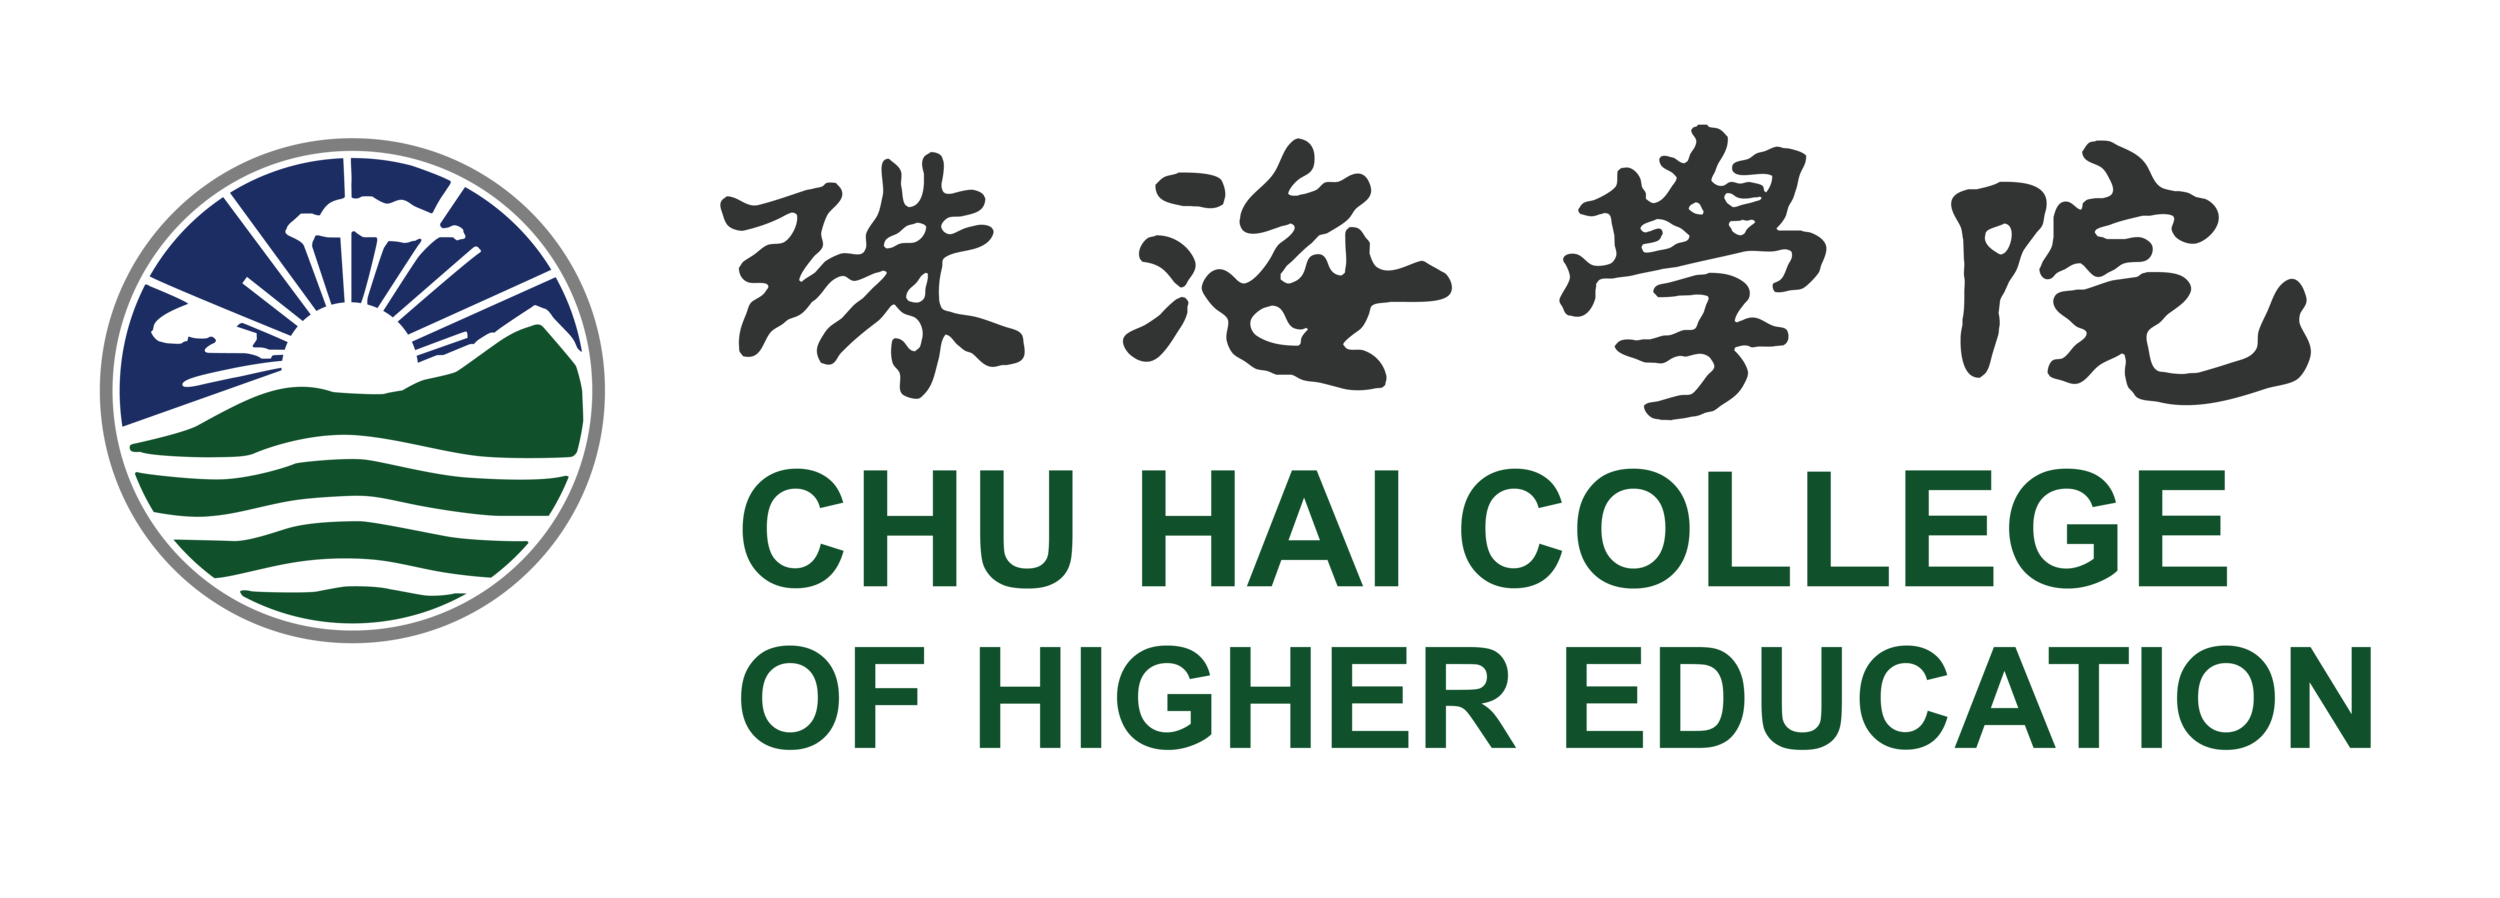 Copy of chu hai college finished _logo-01.png